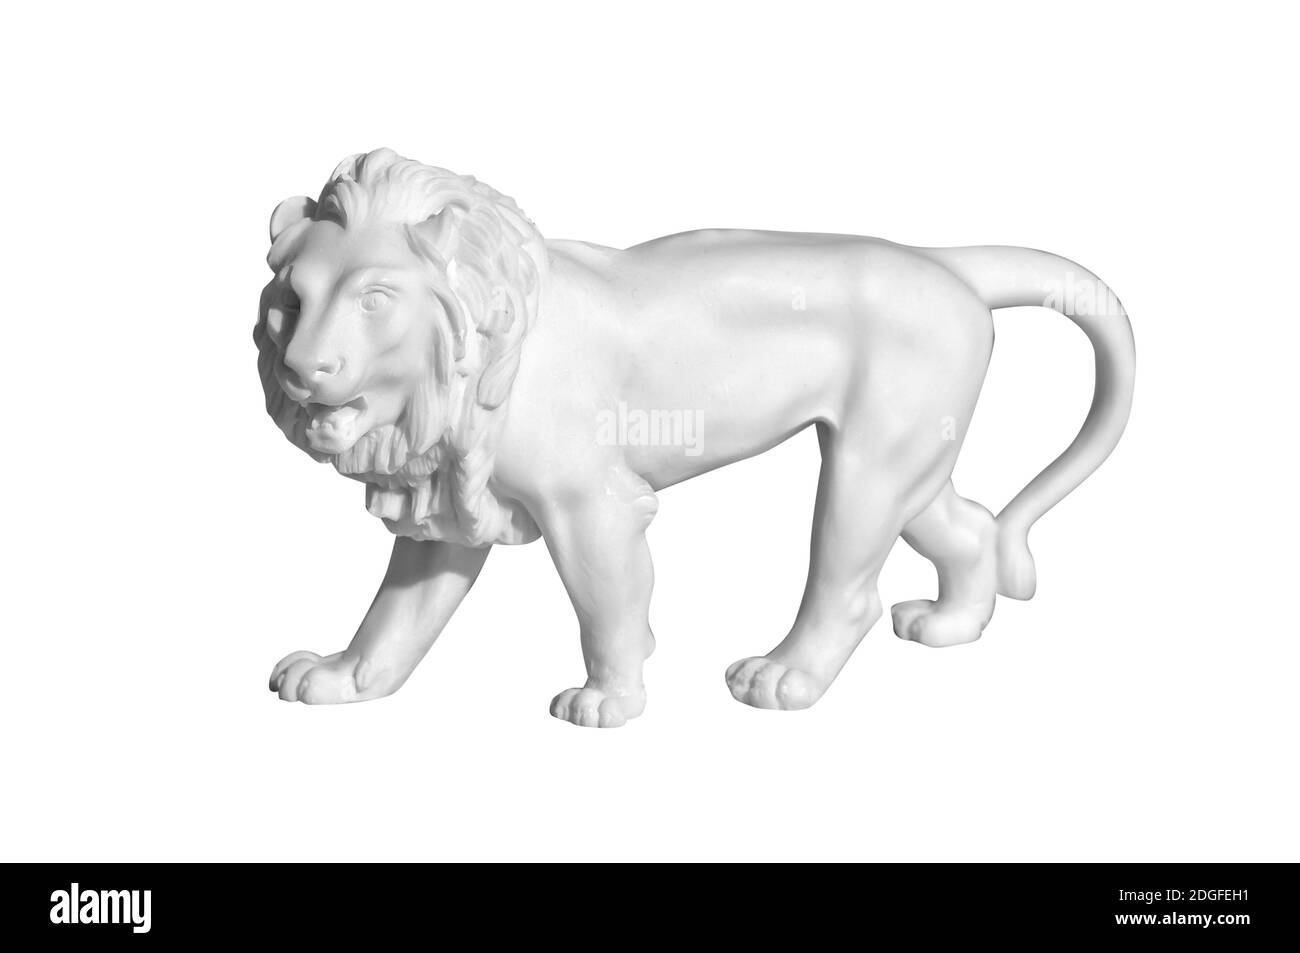 Statue of a lion on a white background Stock Photo